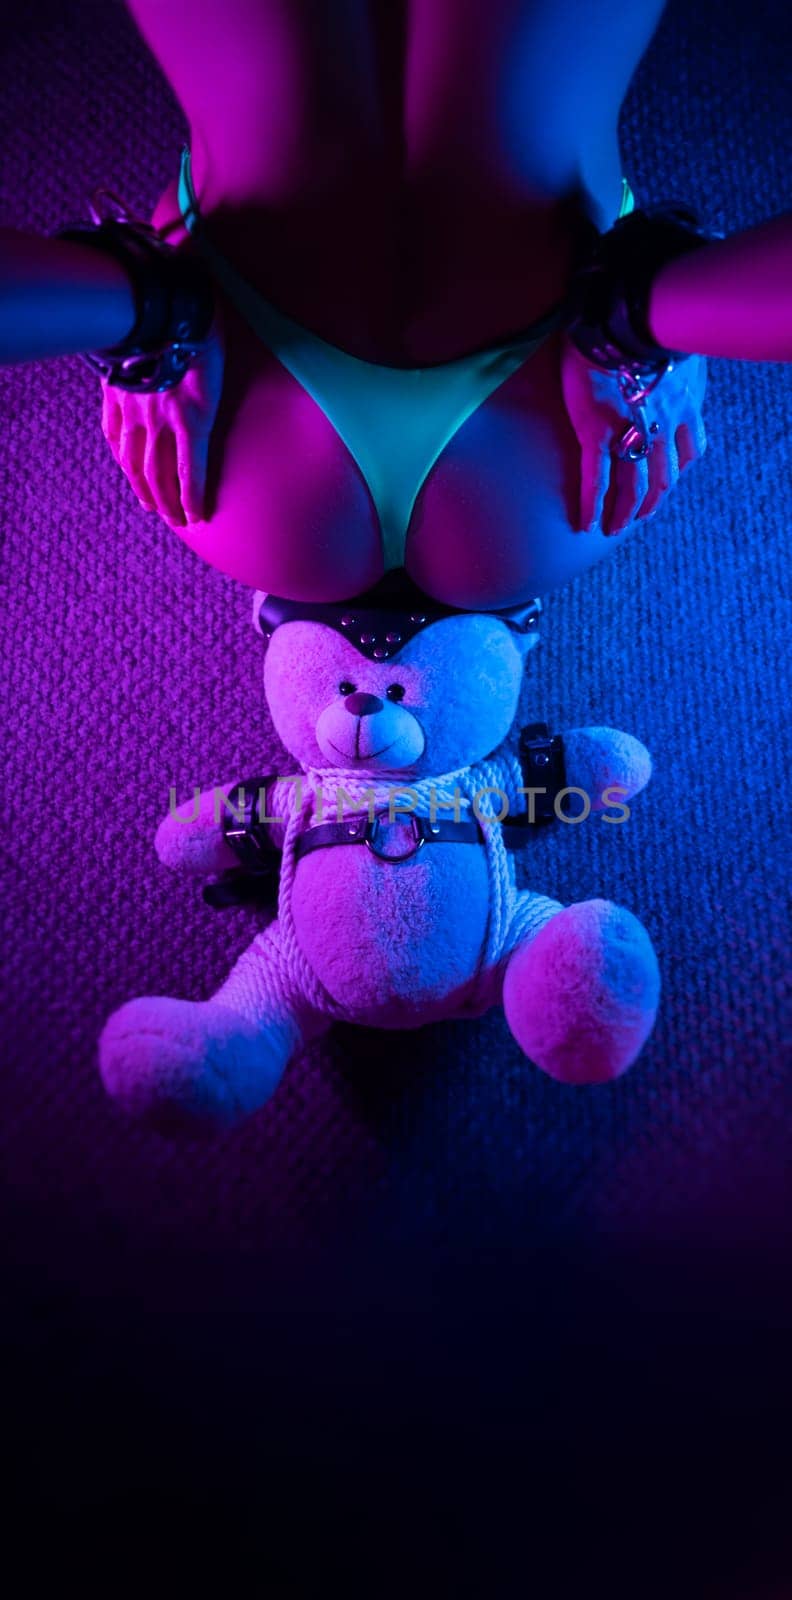 sexy buttocks of a girl in panties and hands behind her back in handcuffs , in an adult BDSM sex game and a teddy bear toy in the neon light